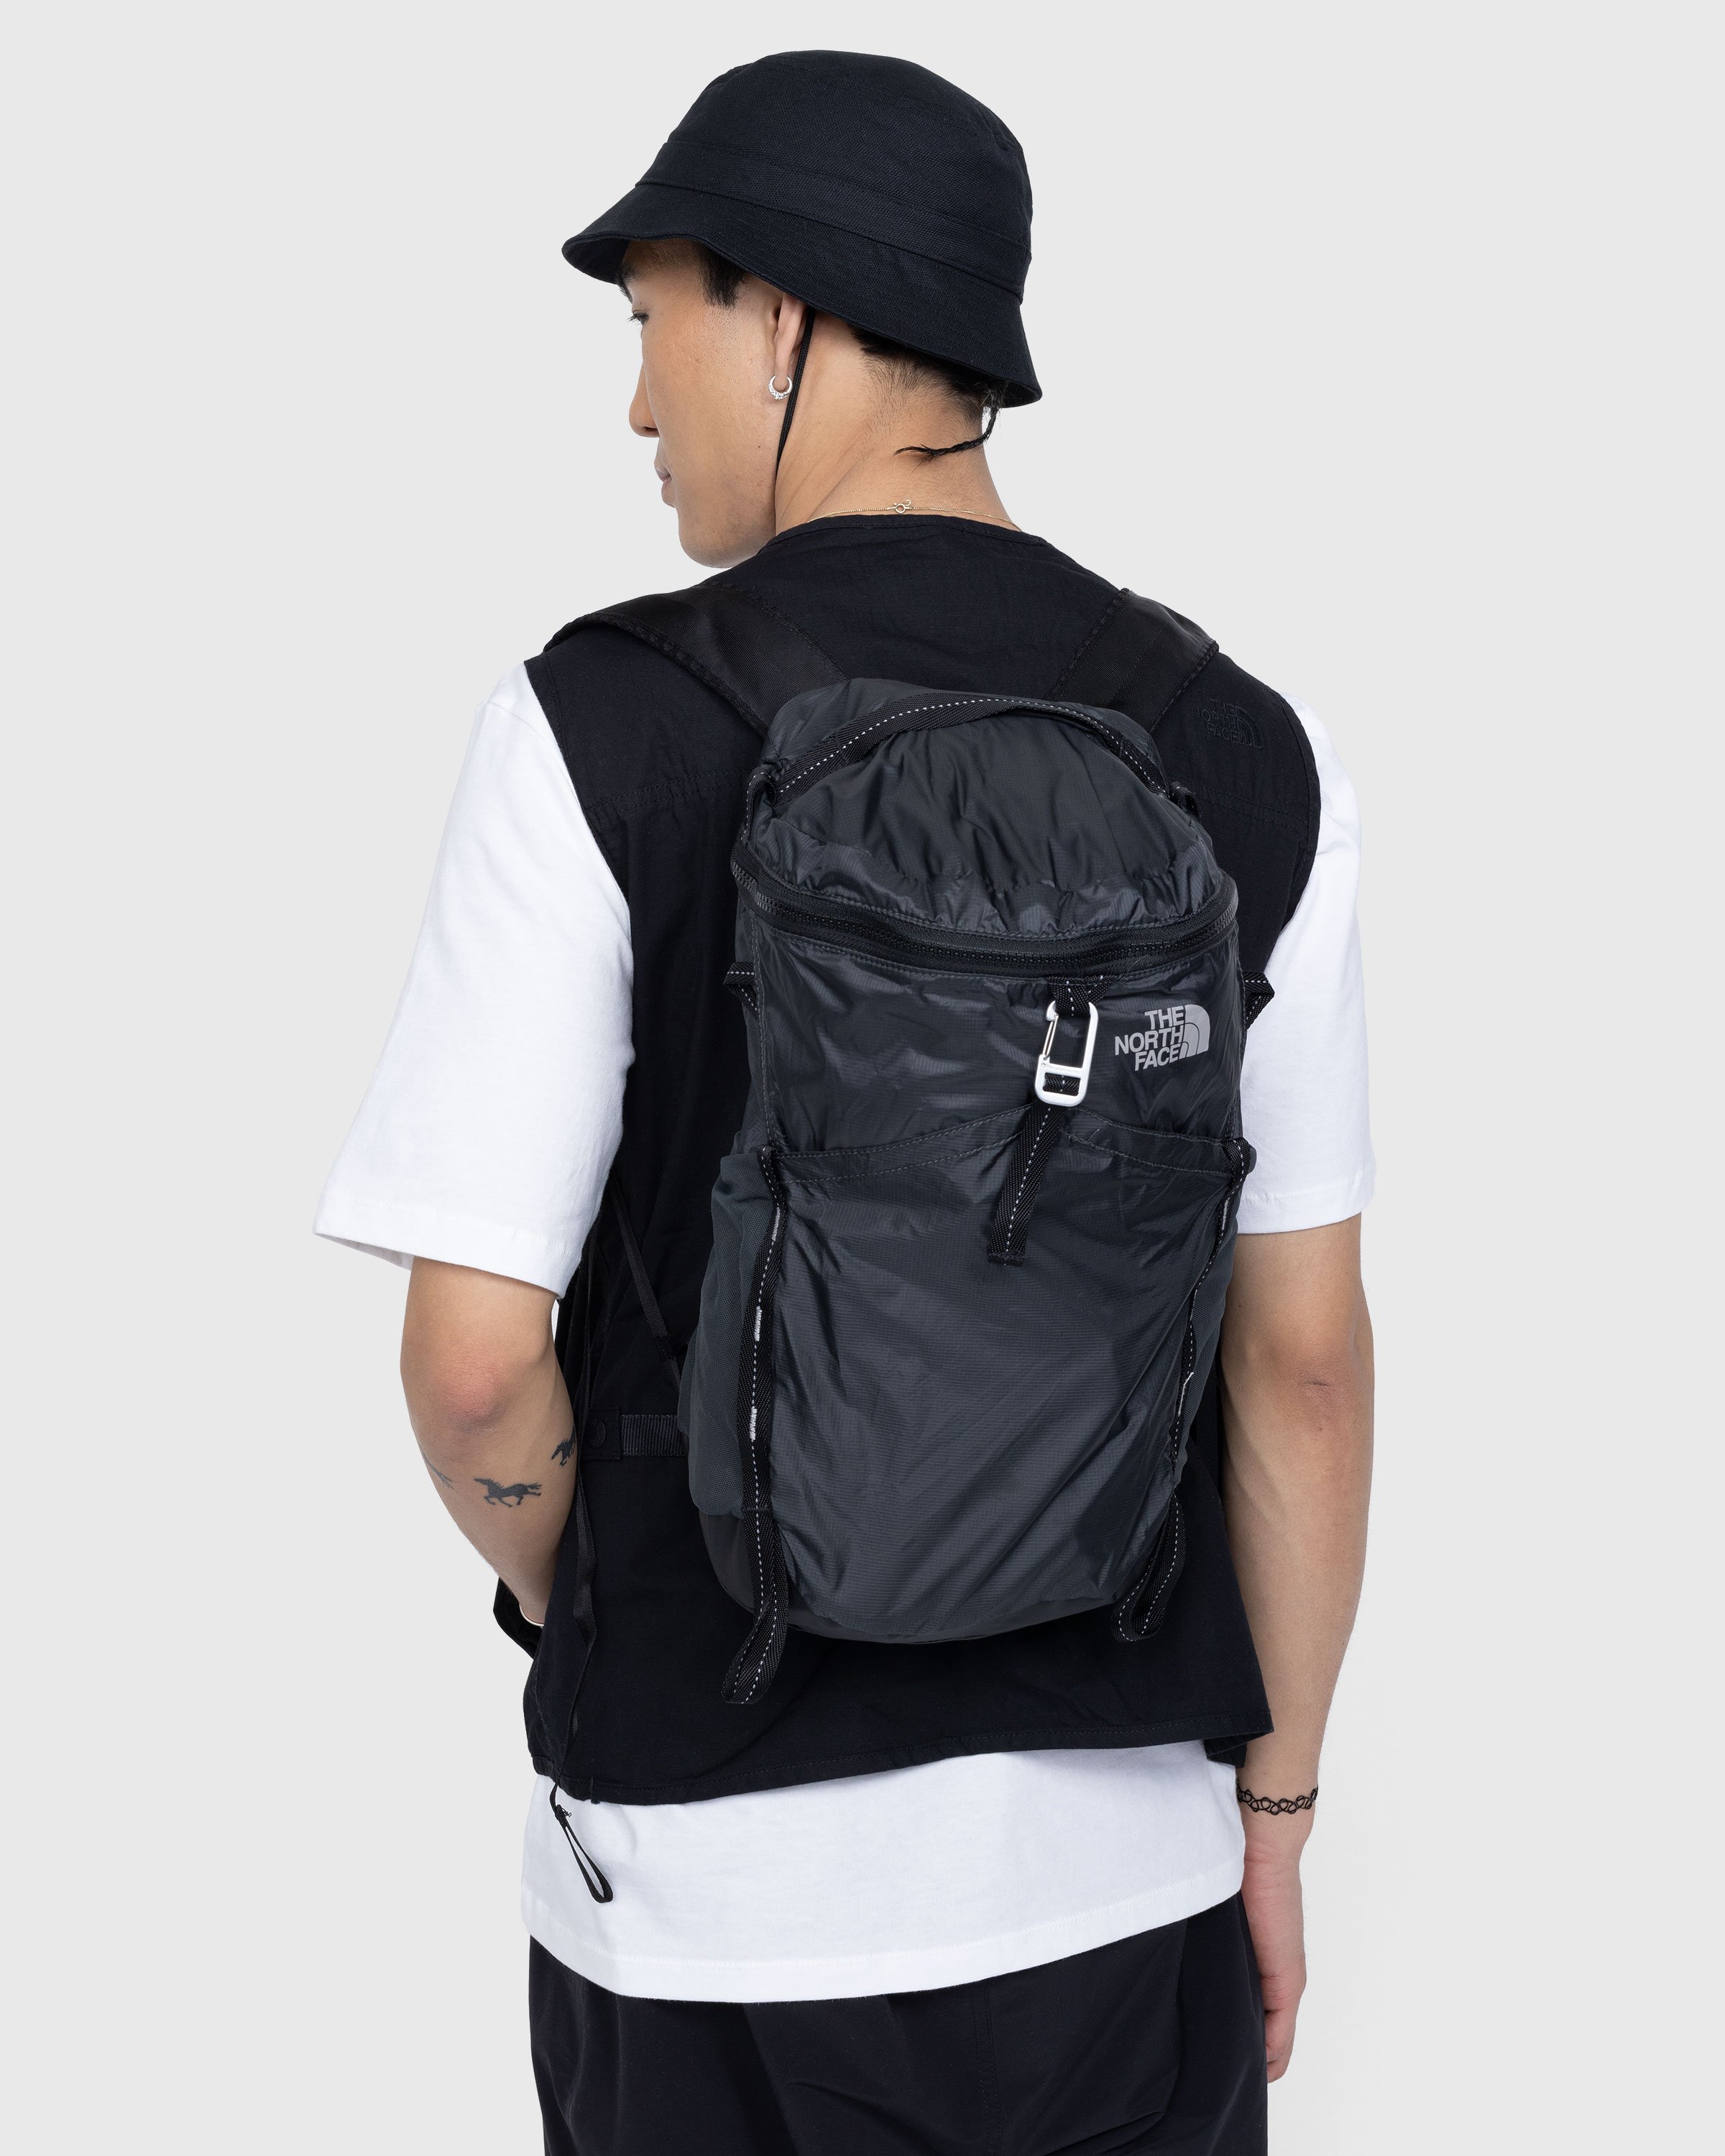 The North Face - Flyweight Daypack Asphalt Grey/TNF Black - Accessories - Grey - Image 6